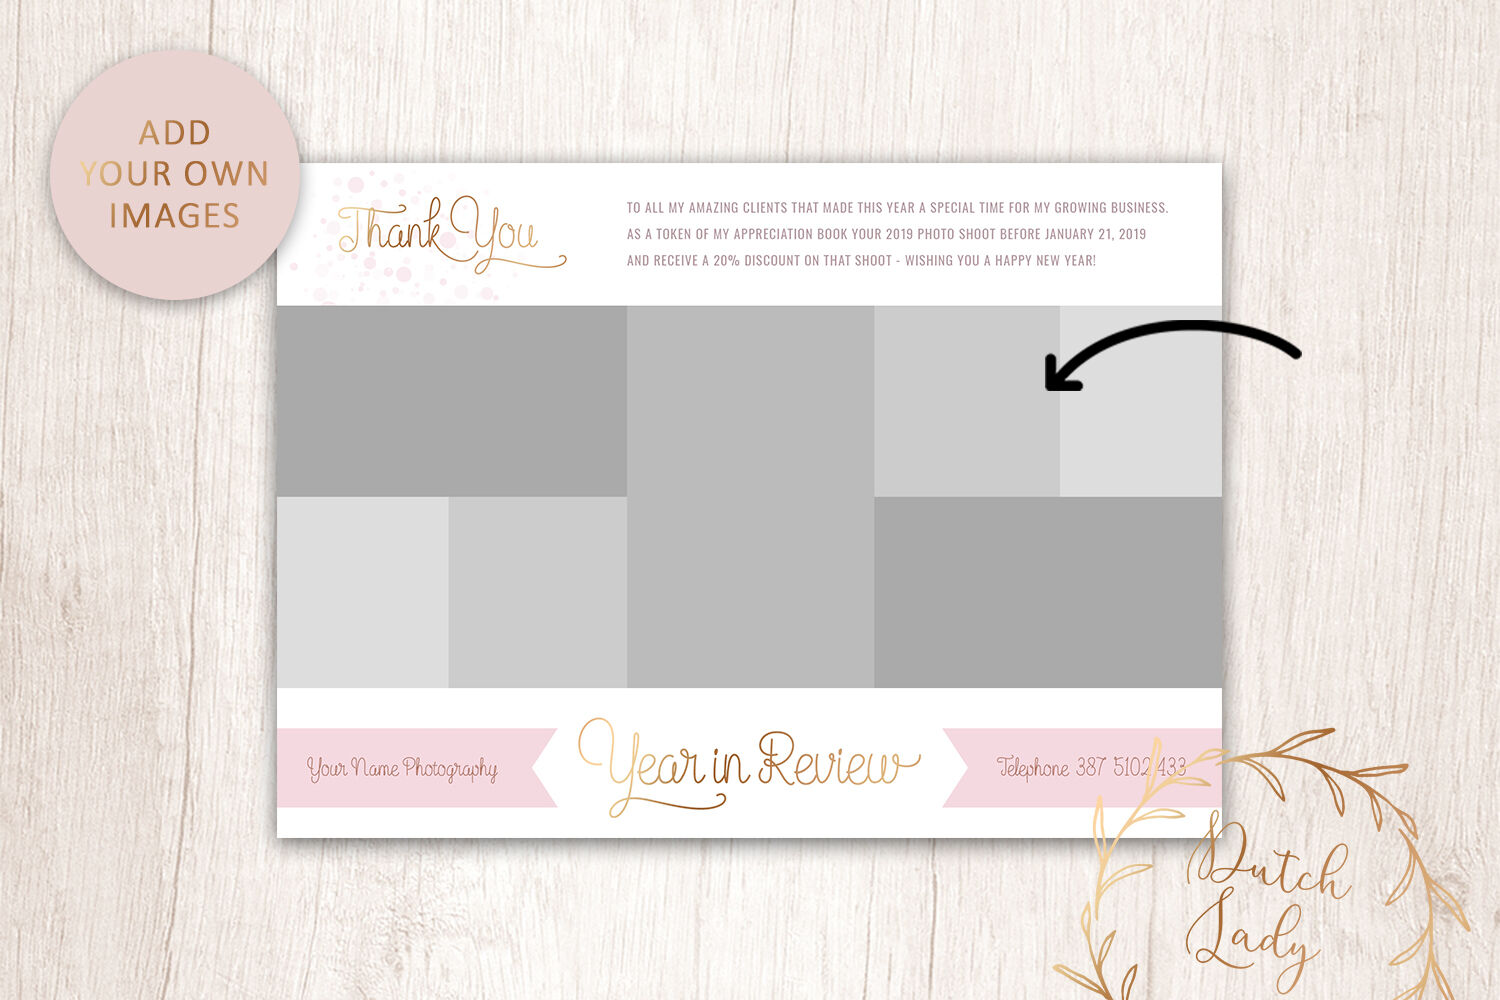 PSD Year In Review Photo Collage Card Template #4 By The Dutch Lady ...